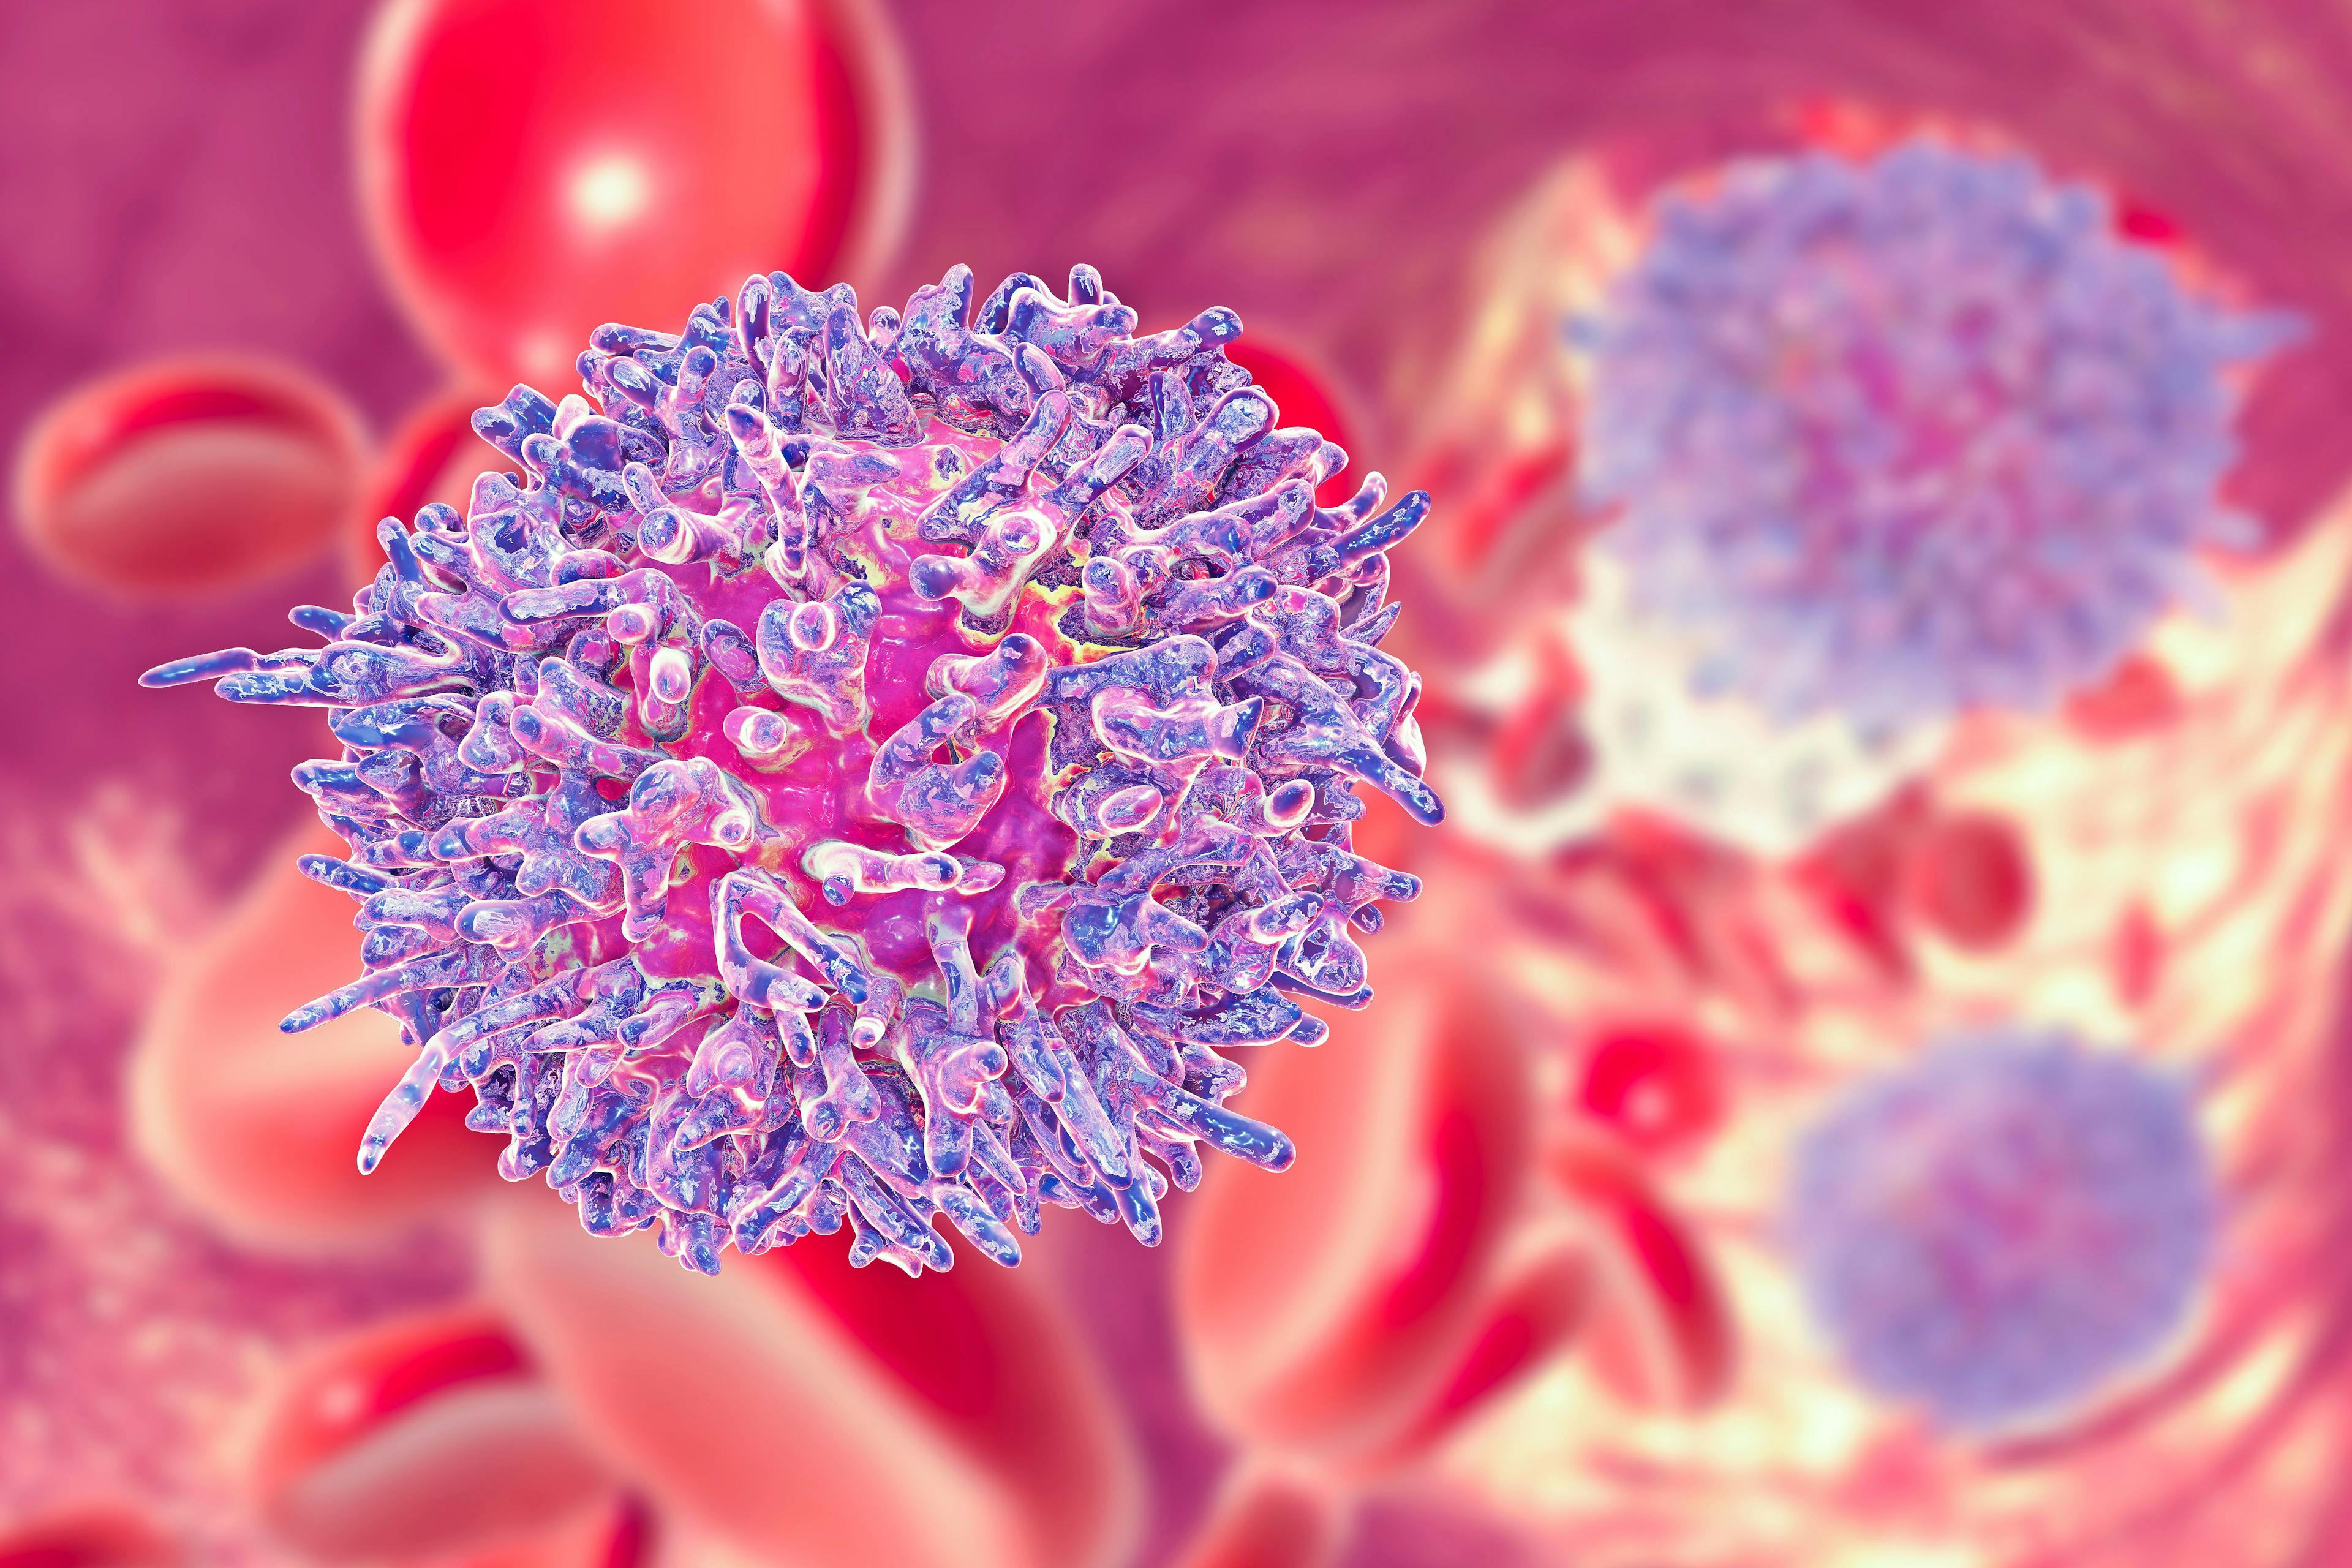 CLL in blood -- Image credit: Dr_Microbe | stock.adobe.com